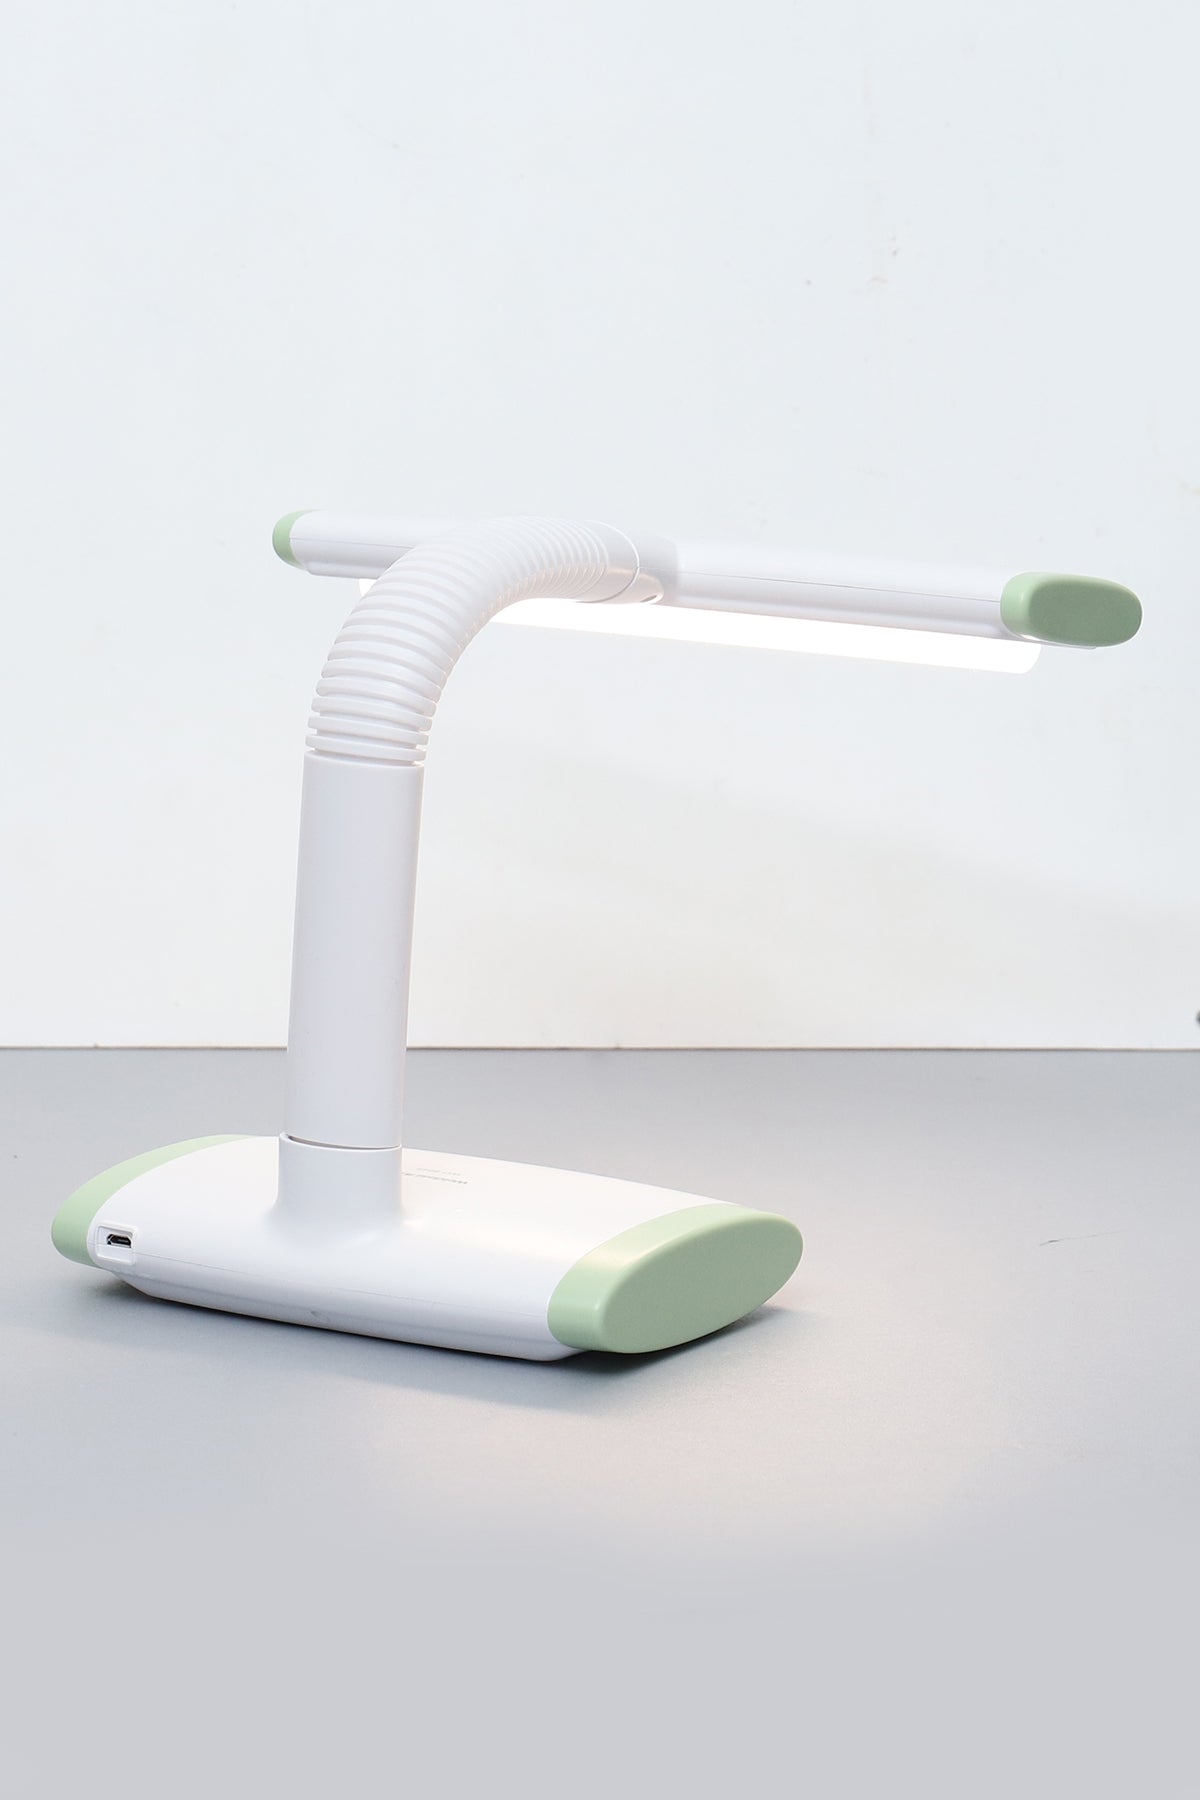 Rechargeable LED Table Reading Lamp